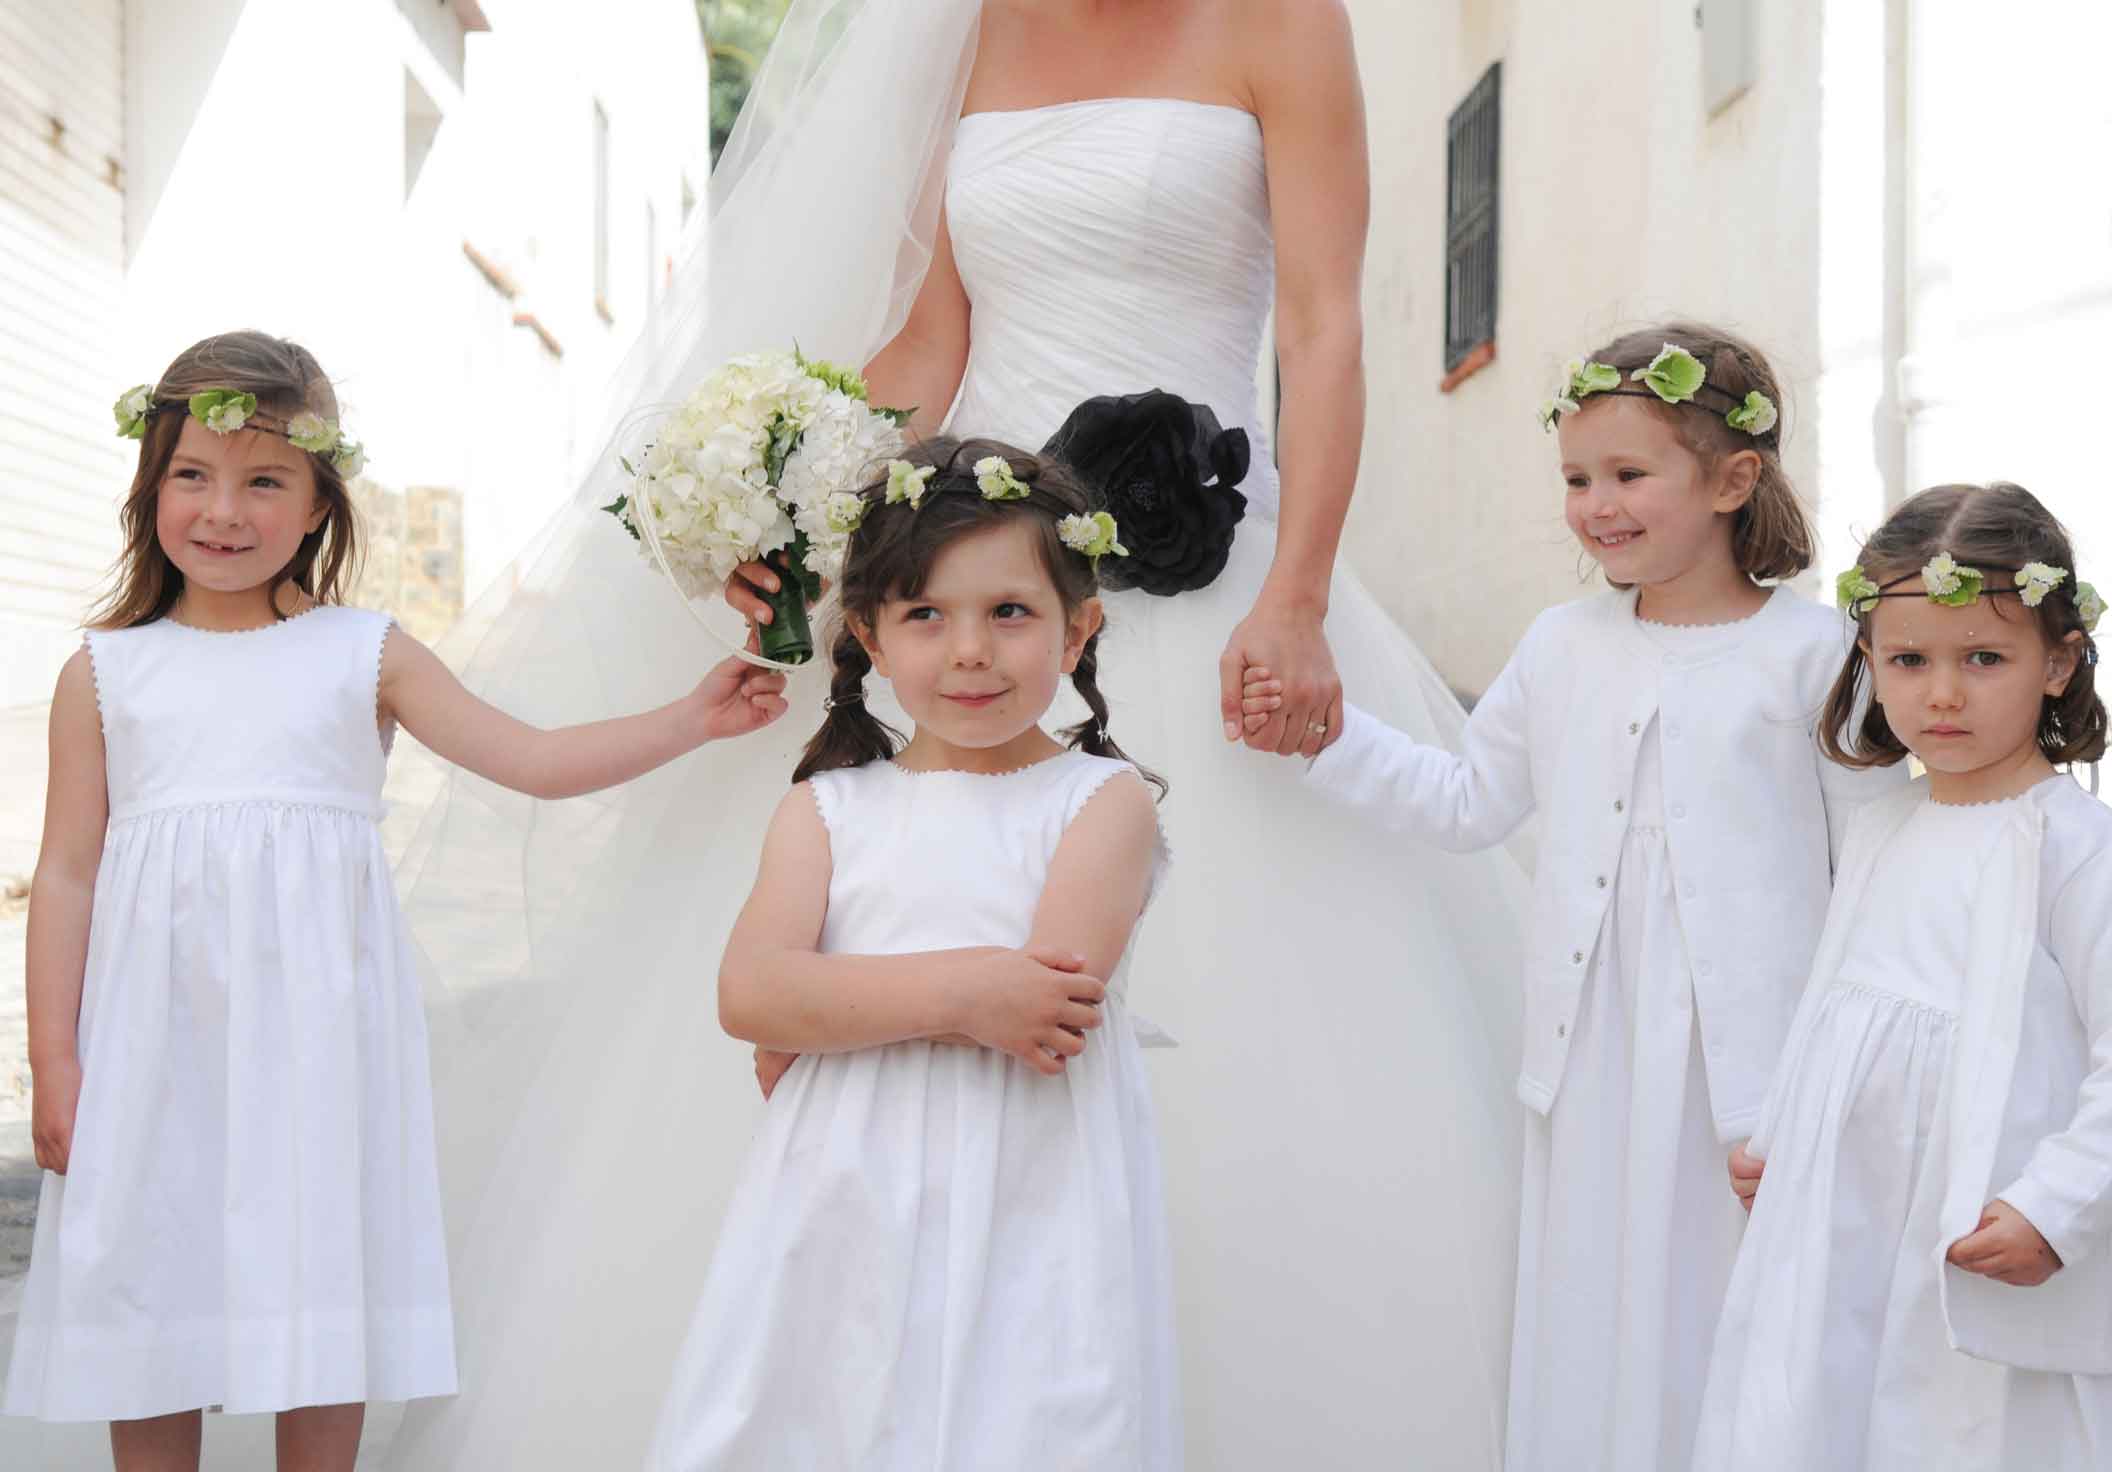 Littles bridesmaids dress with crown flowers french wedding in Spain Costa Brava Cadaques